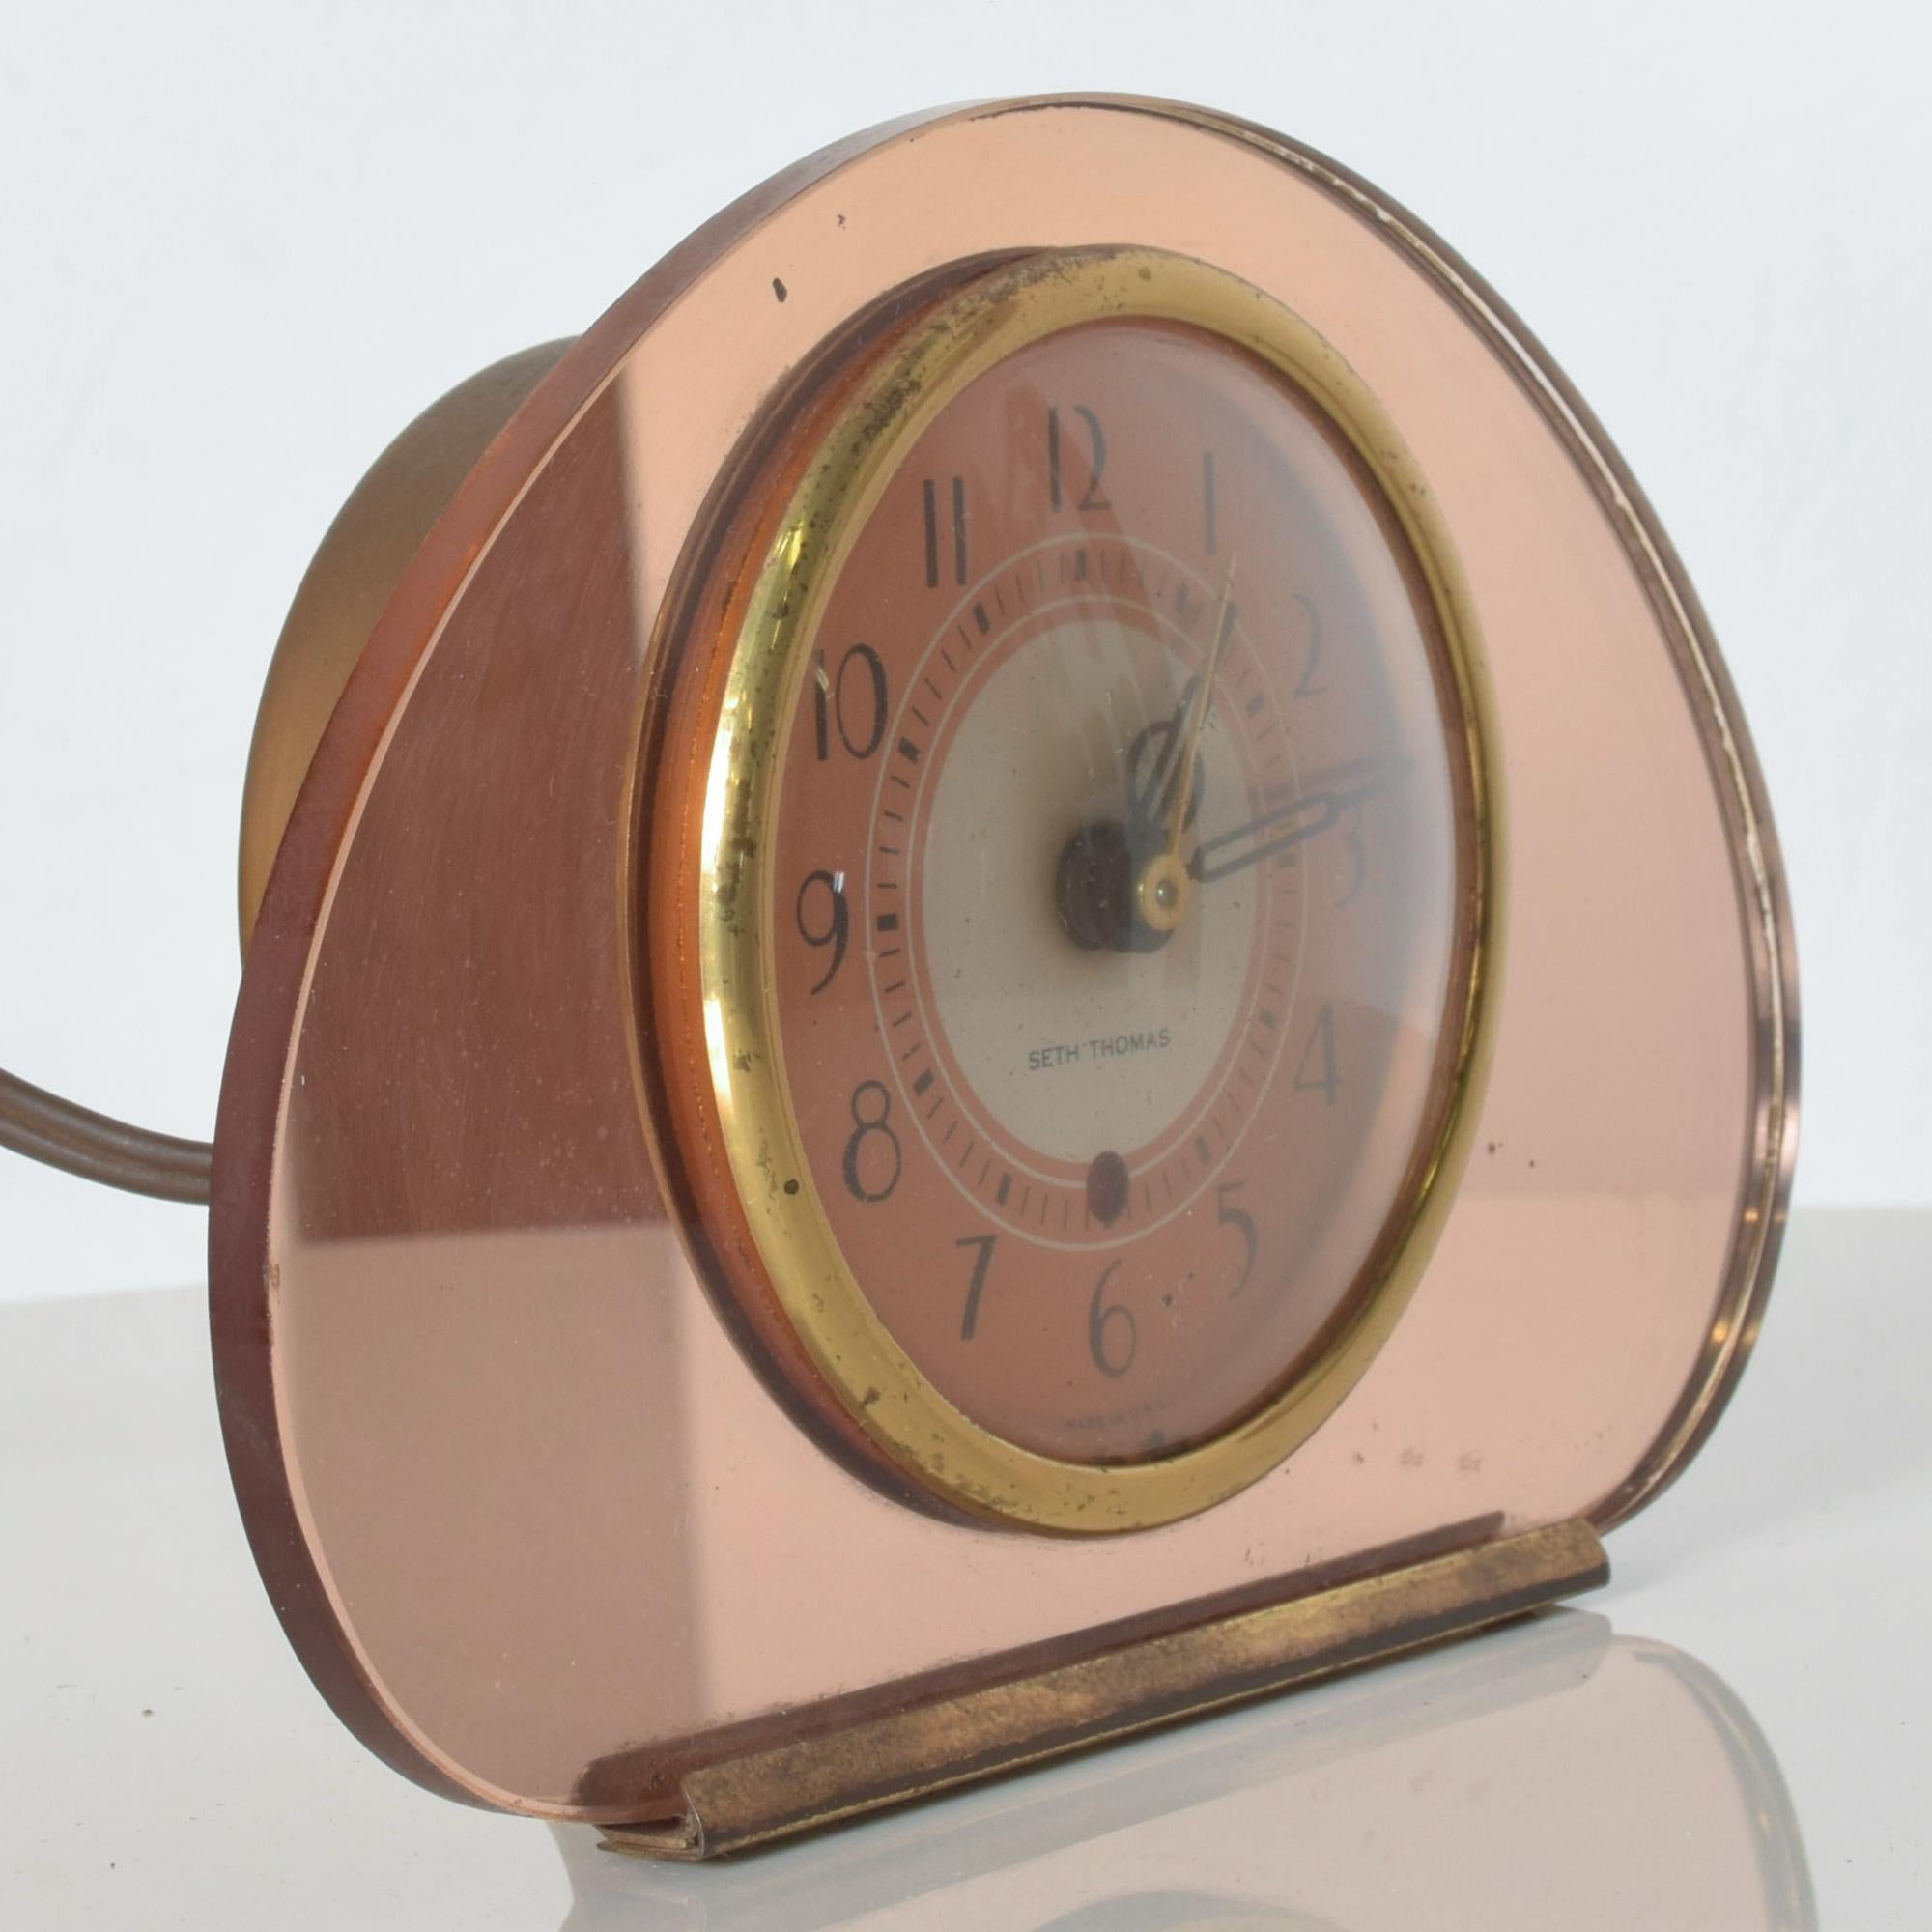 Table Clock
Seth Thomas Sequin Art Deco pink copper mirror electric table clock glamorous Old Hollywood circa 1940s
Pretty pinky peach mirrored case with a copper face and black numerals. Fabulous look!
Dimensions: 4 3/4